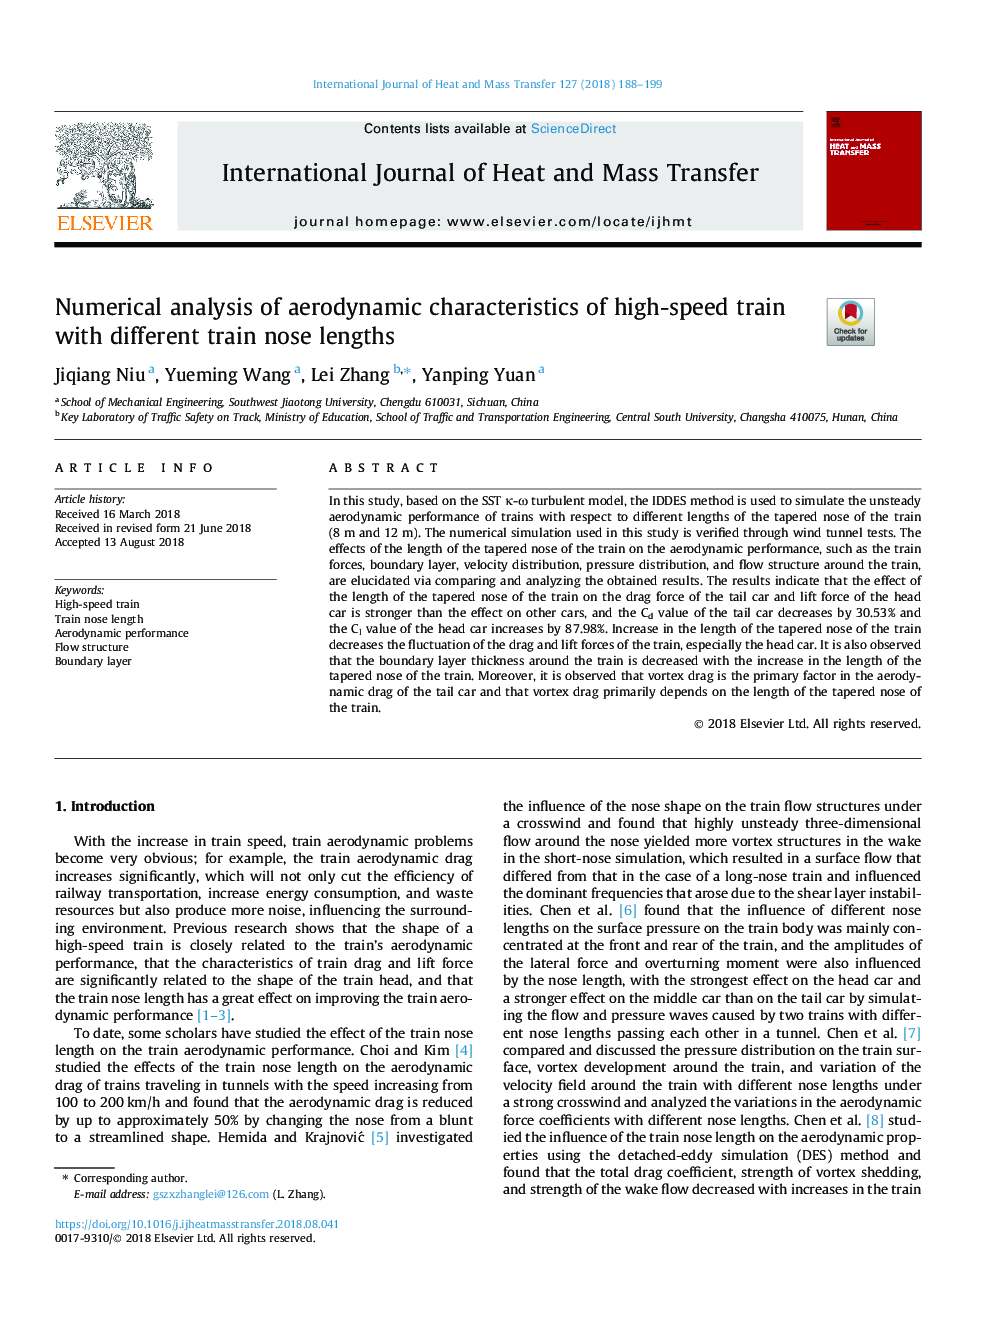 Numerical analysis of aerodynamic characteristics of high-speed train with different train nose lengths